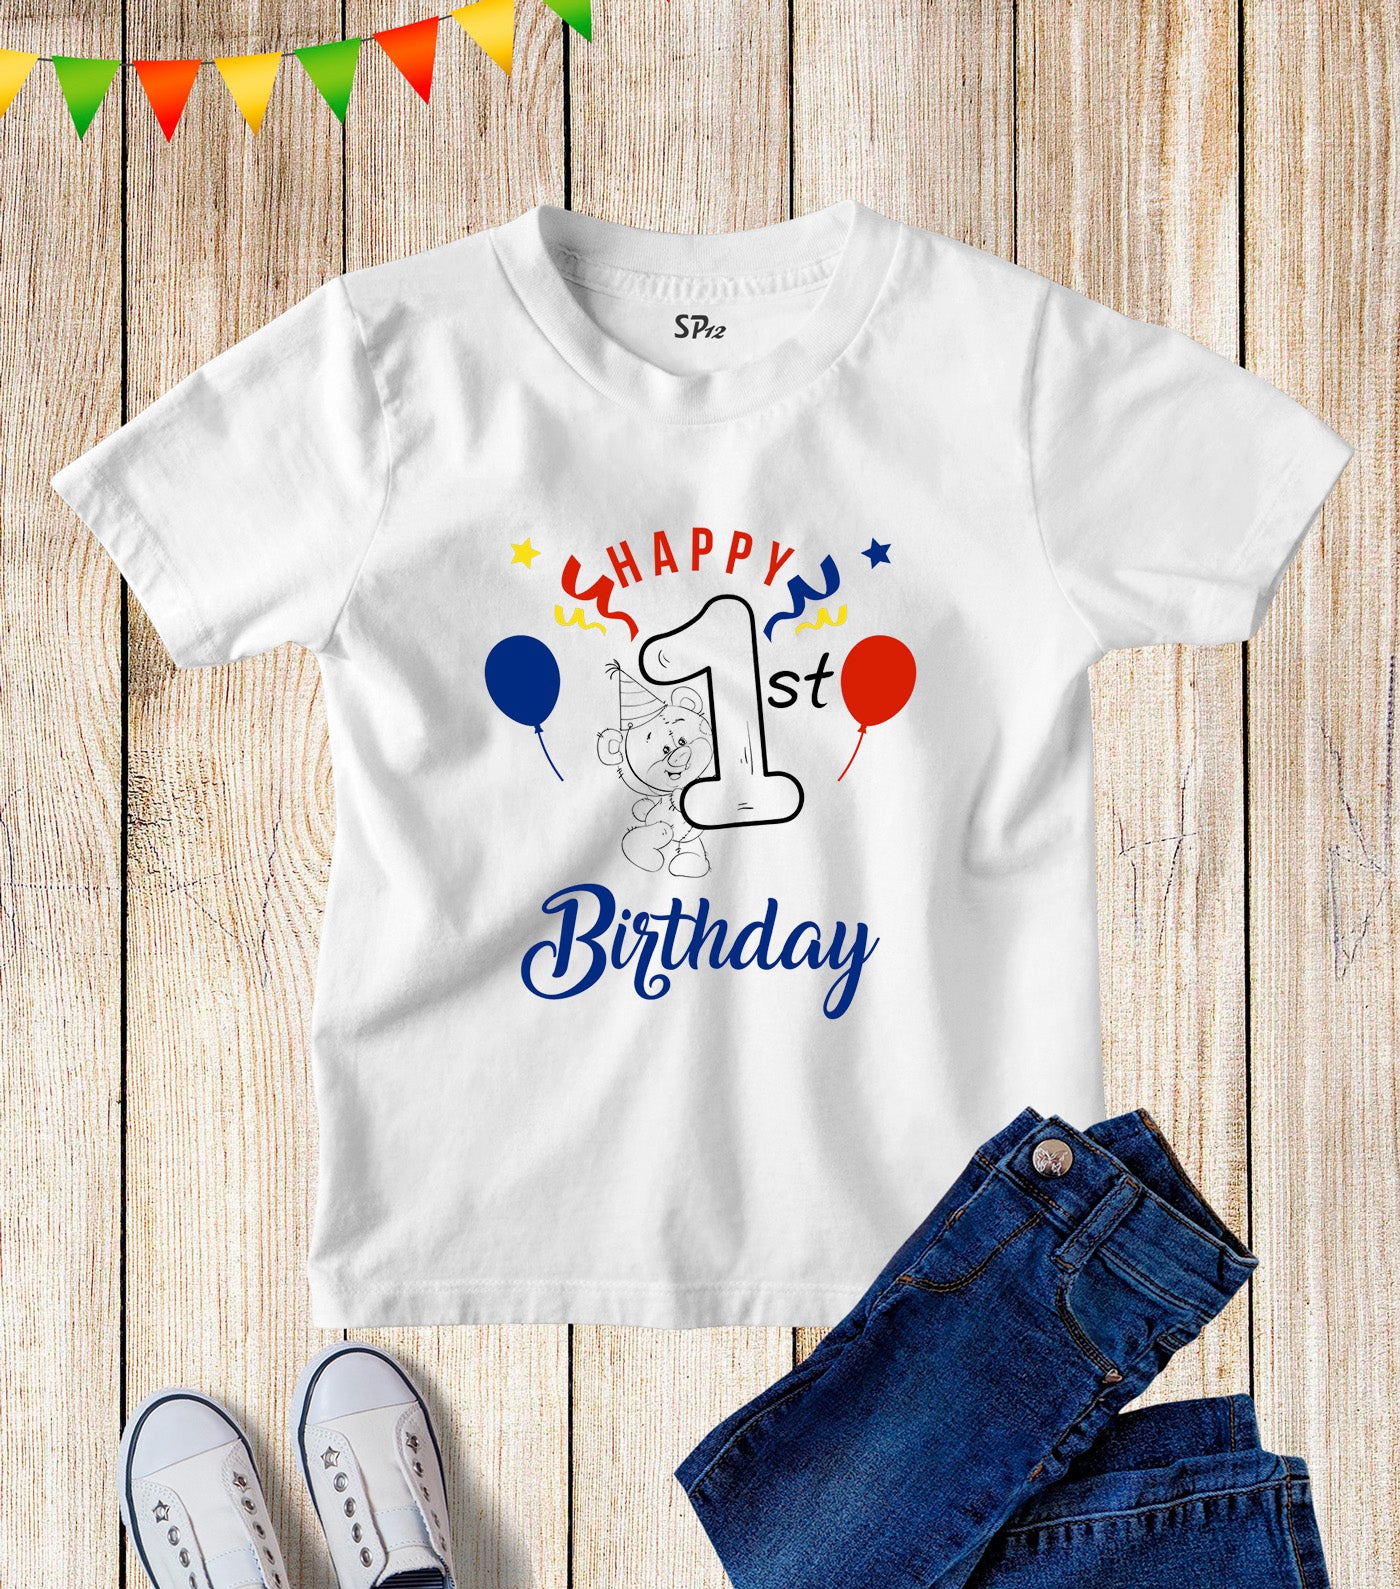 It will be a cutest little 1st birthday outfit t shirt for baby boy or baby girl to celebrate their first year birthday party.